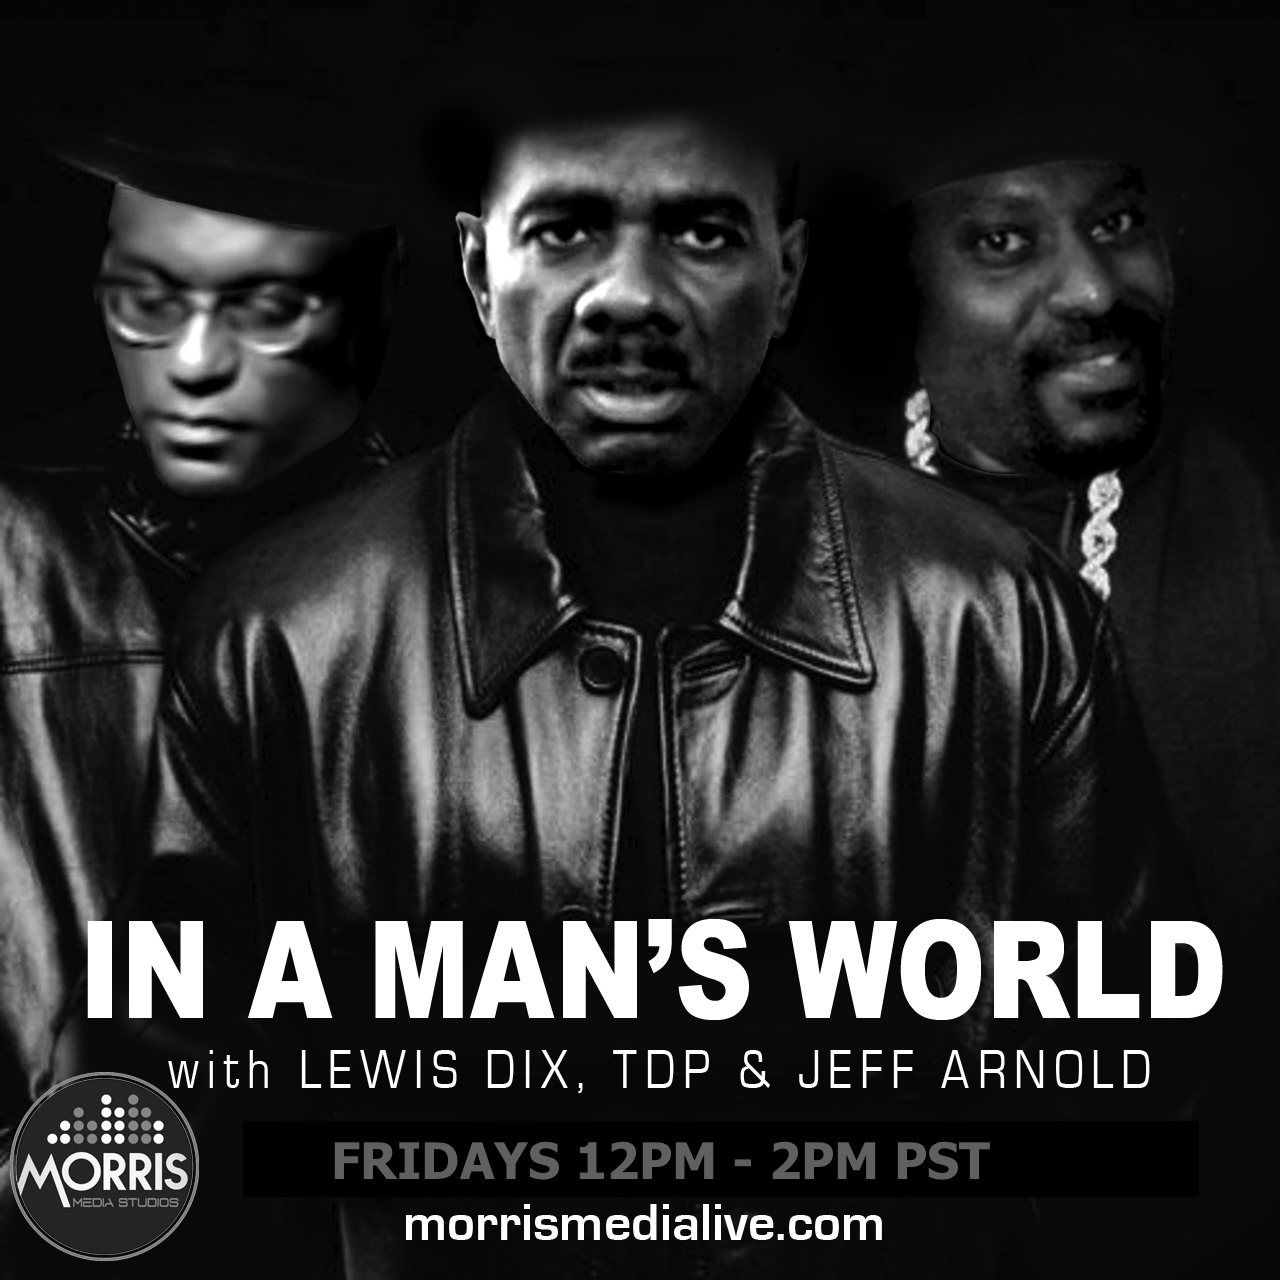 In A Man's World w/Lewis Dix, TDP & Jeff Arnold 7-13-18